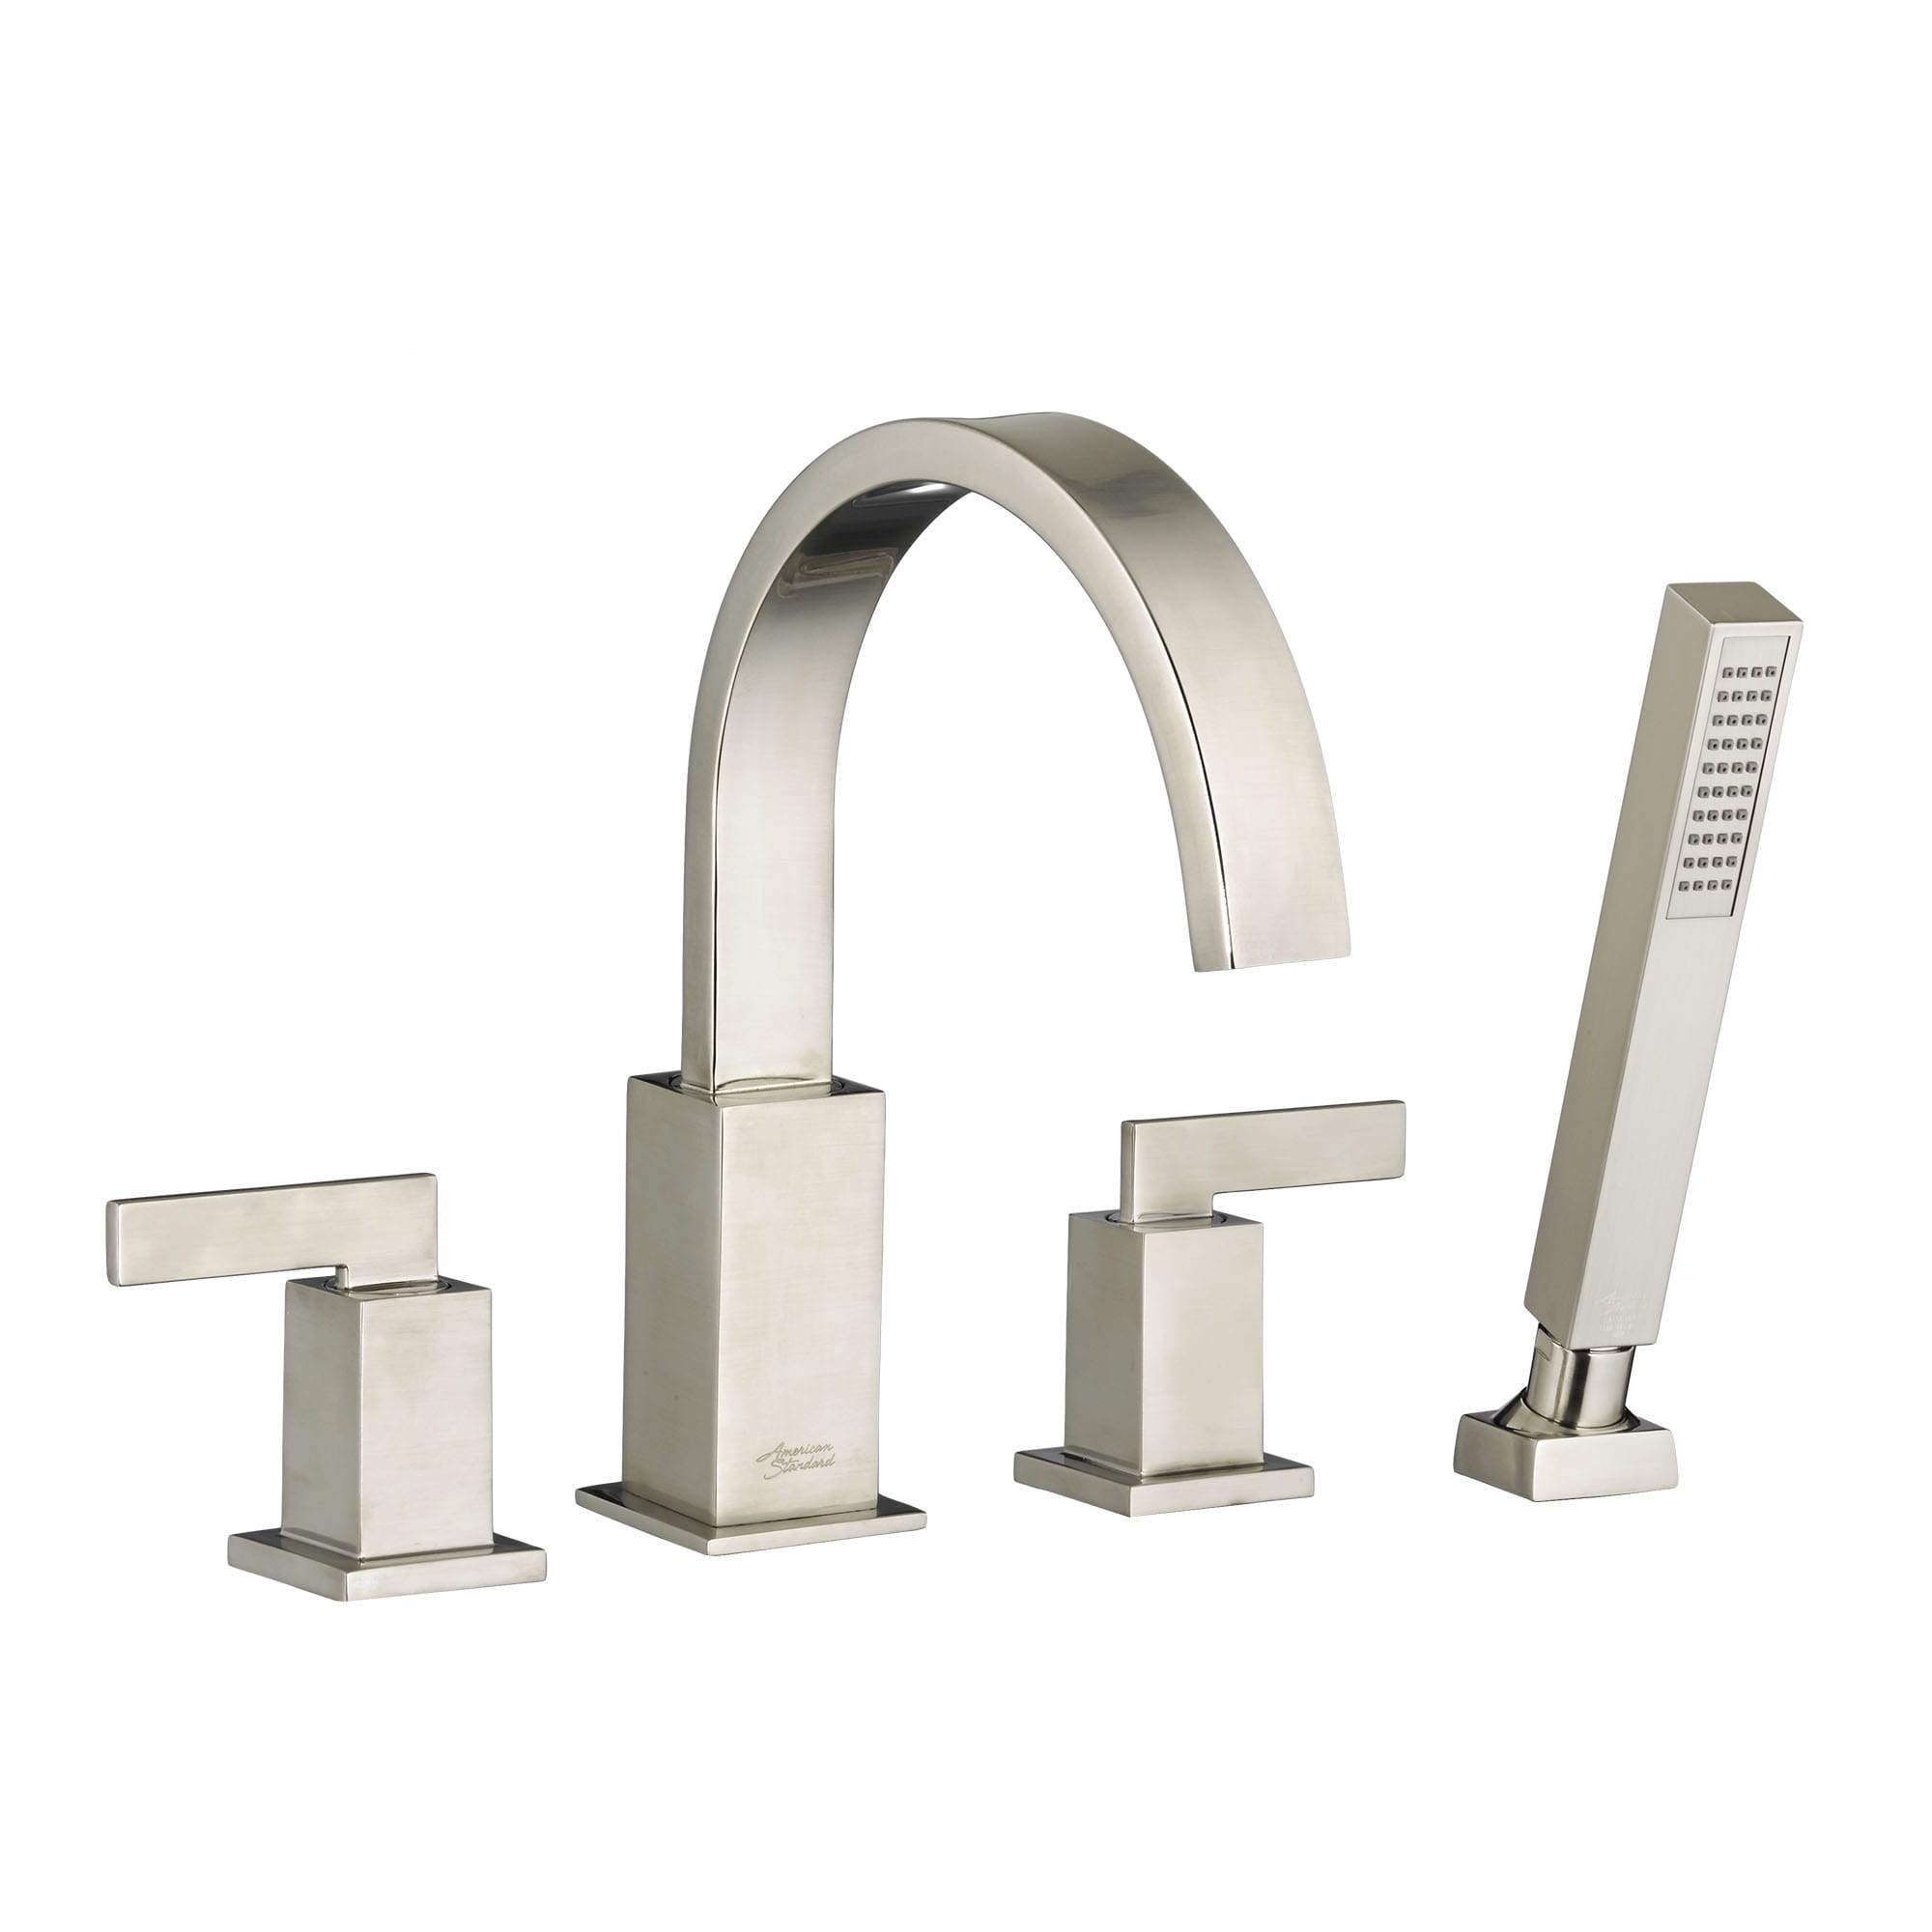 Time Square Bathtub Faucet With Lever Handles and Personal Shower for Flash Rough In Valve   BRUSHED NICKEL